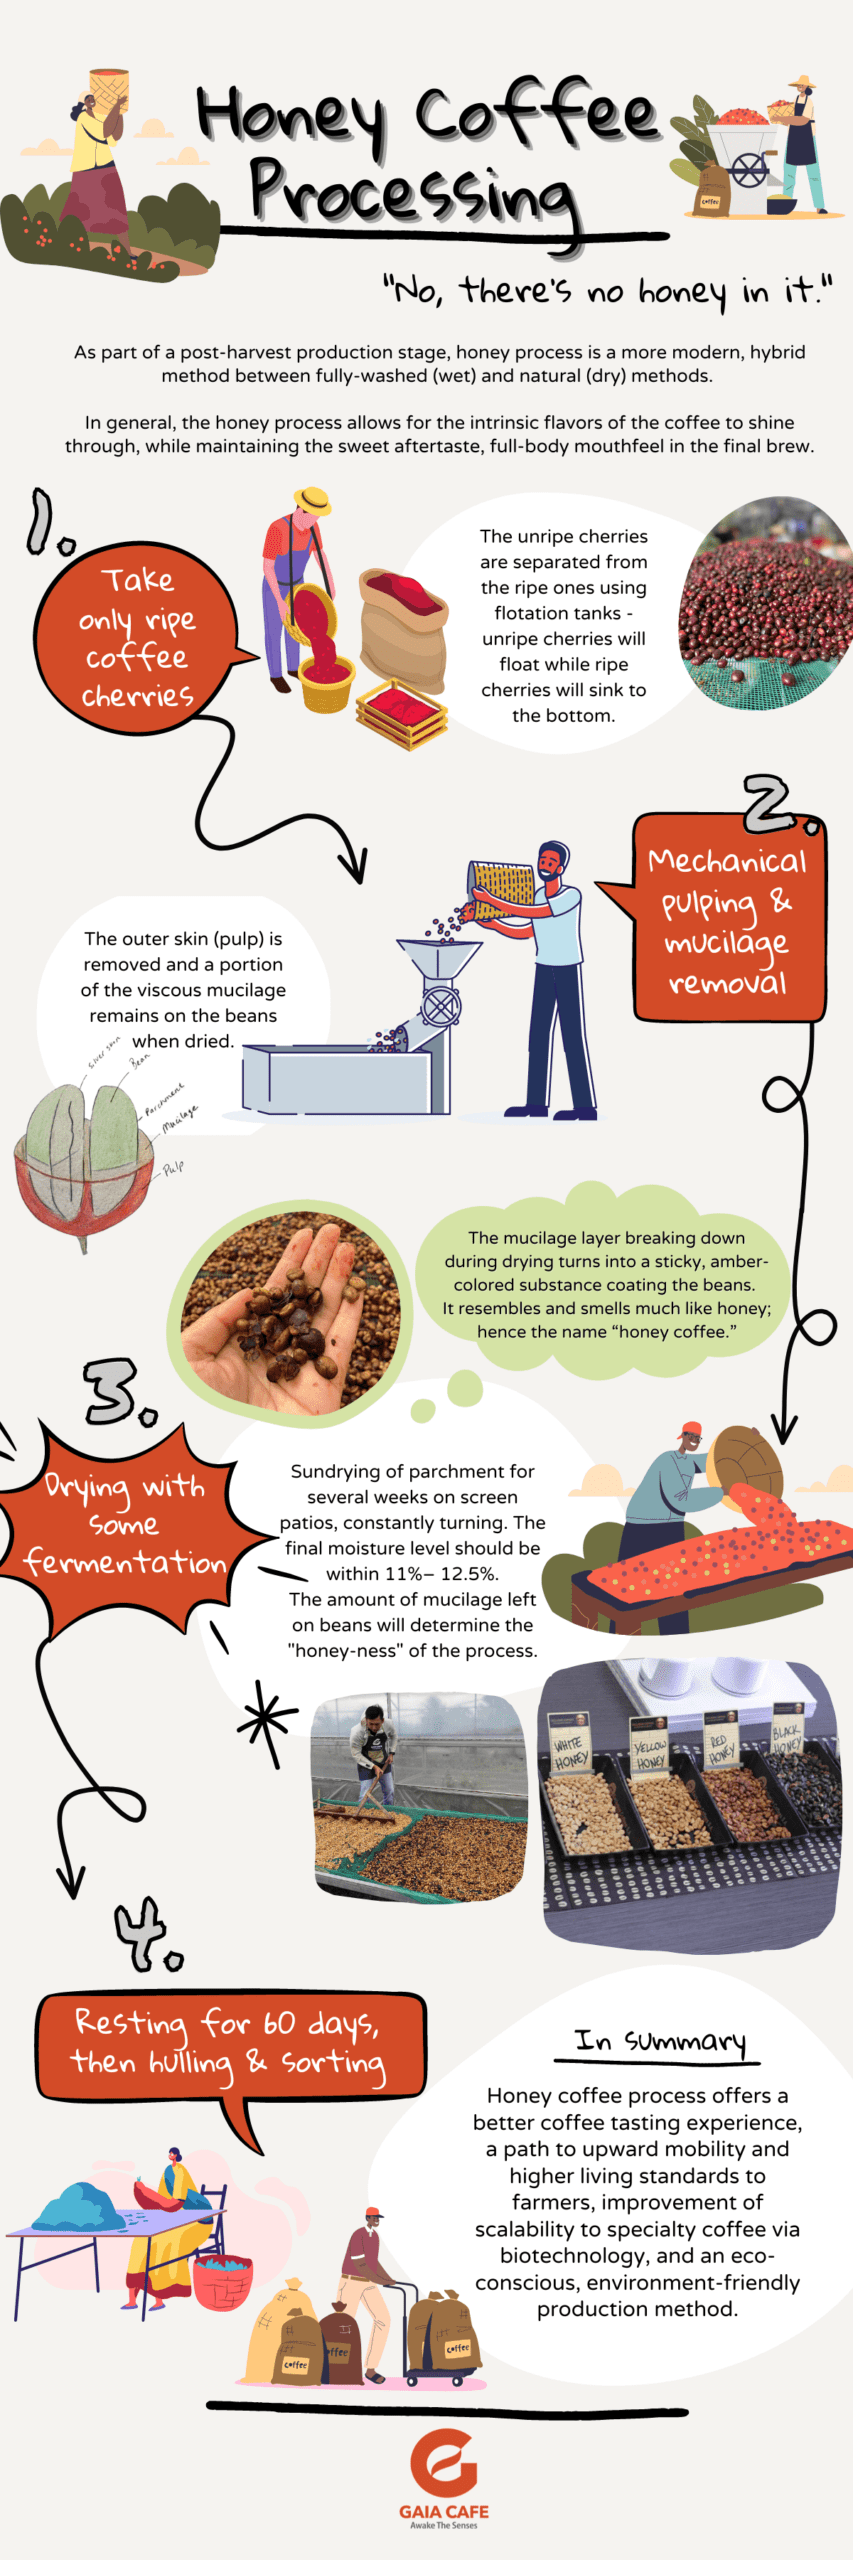 An infographic on honey coffee processing method